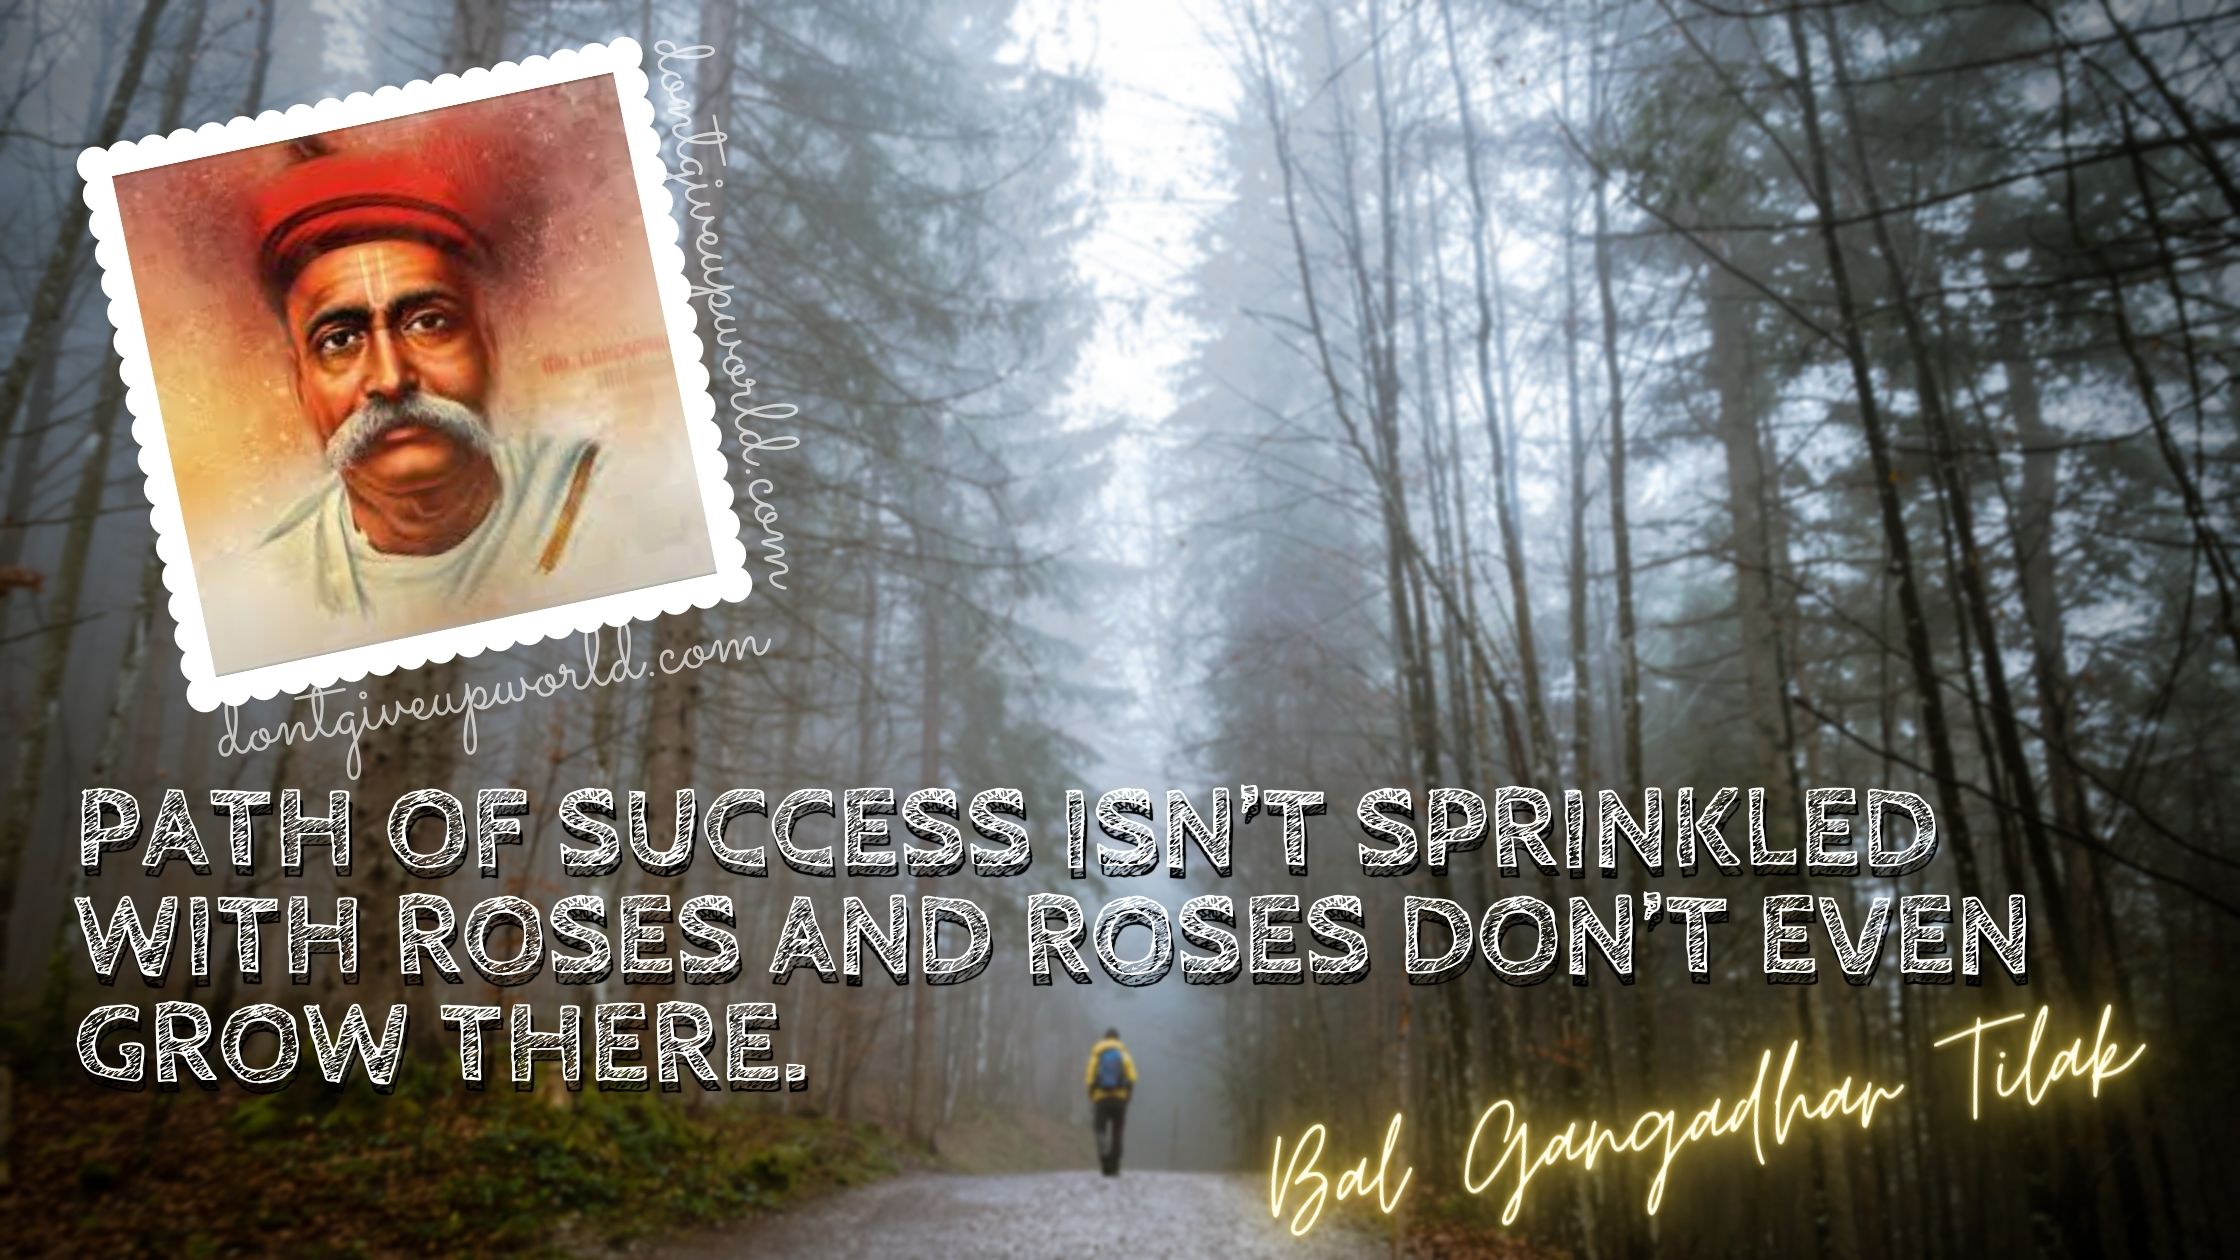 bal gangadhar wallpaper with  quotes on path of success doesn't have roses but thorns
bal gangadhar tilak 100th death anniversary
foggy winter jungle trek